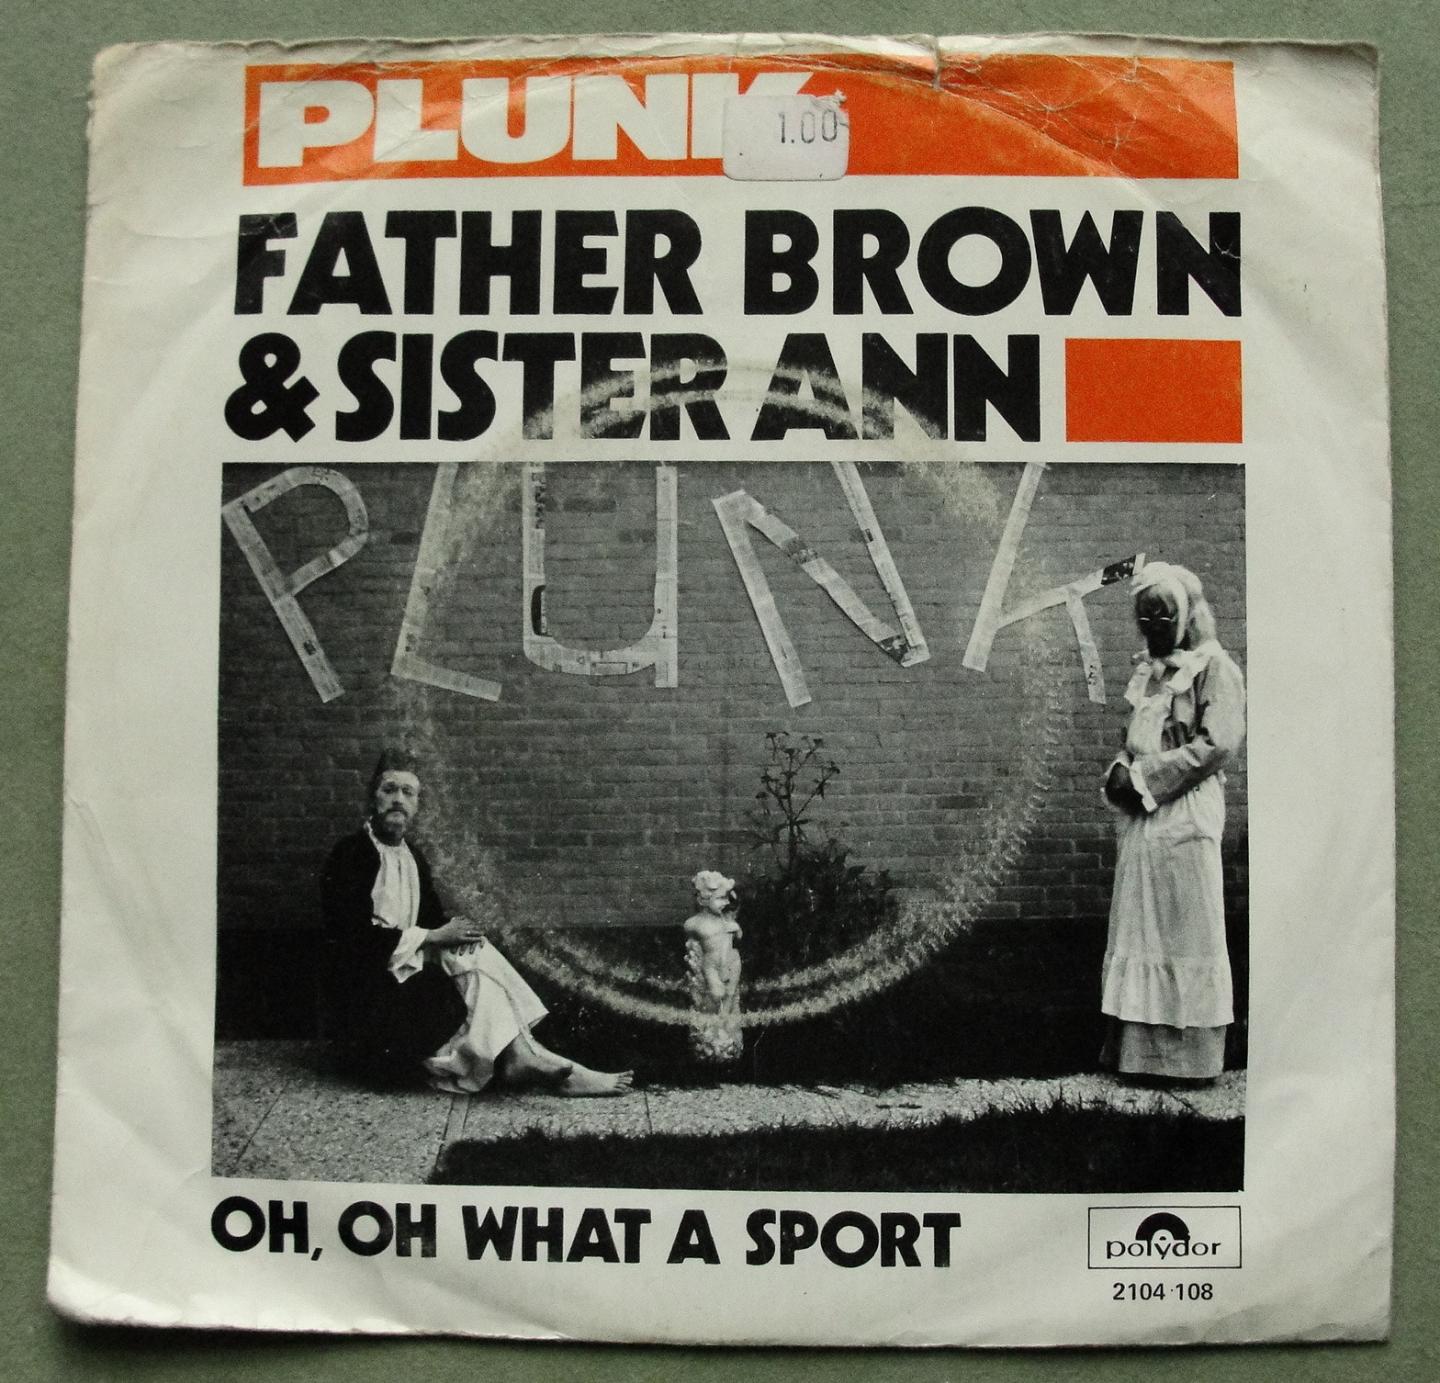 Fluxus; Darkanivap (= label Wim T. Schippers): FATHER BROWN & SISTER ANN - PLUNK / OH, OH WHAT A SPORT